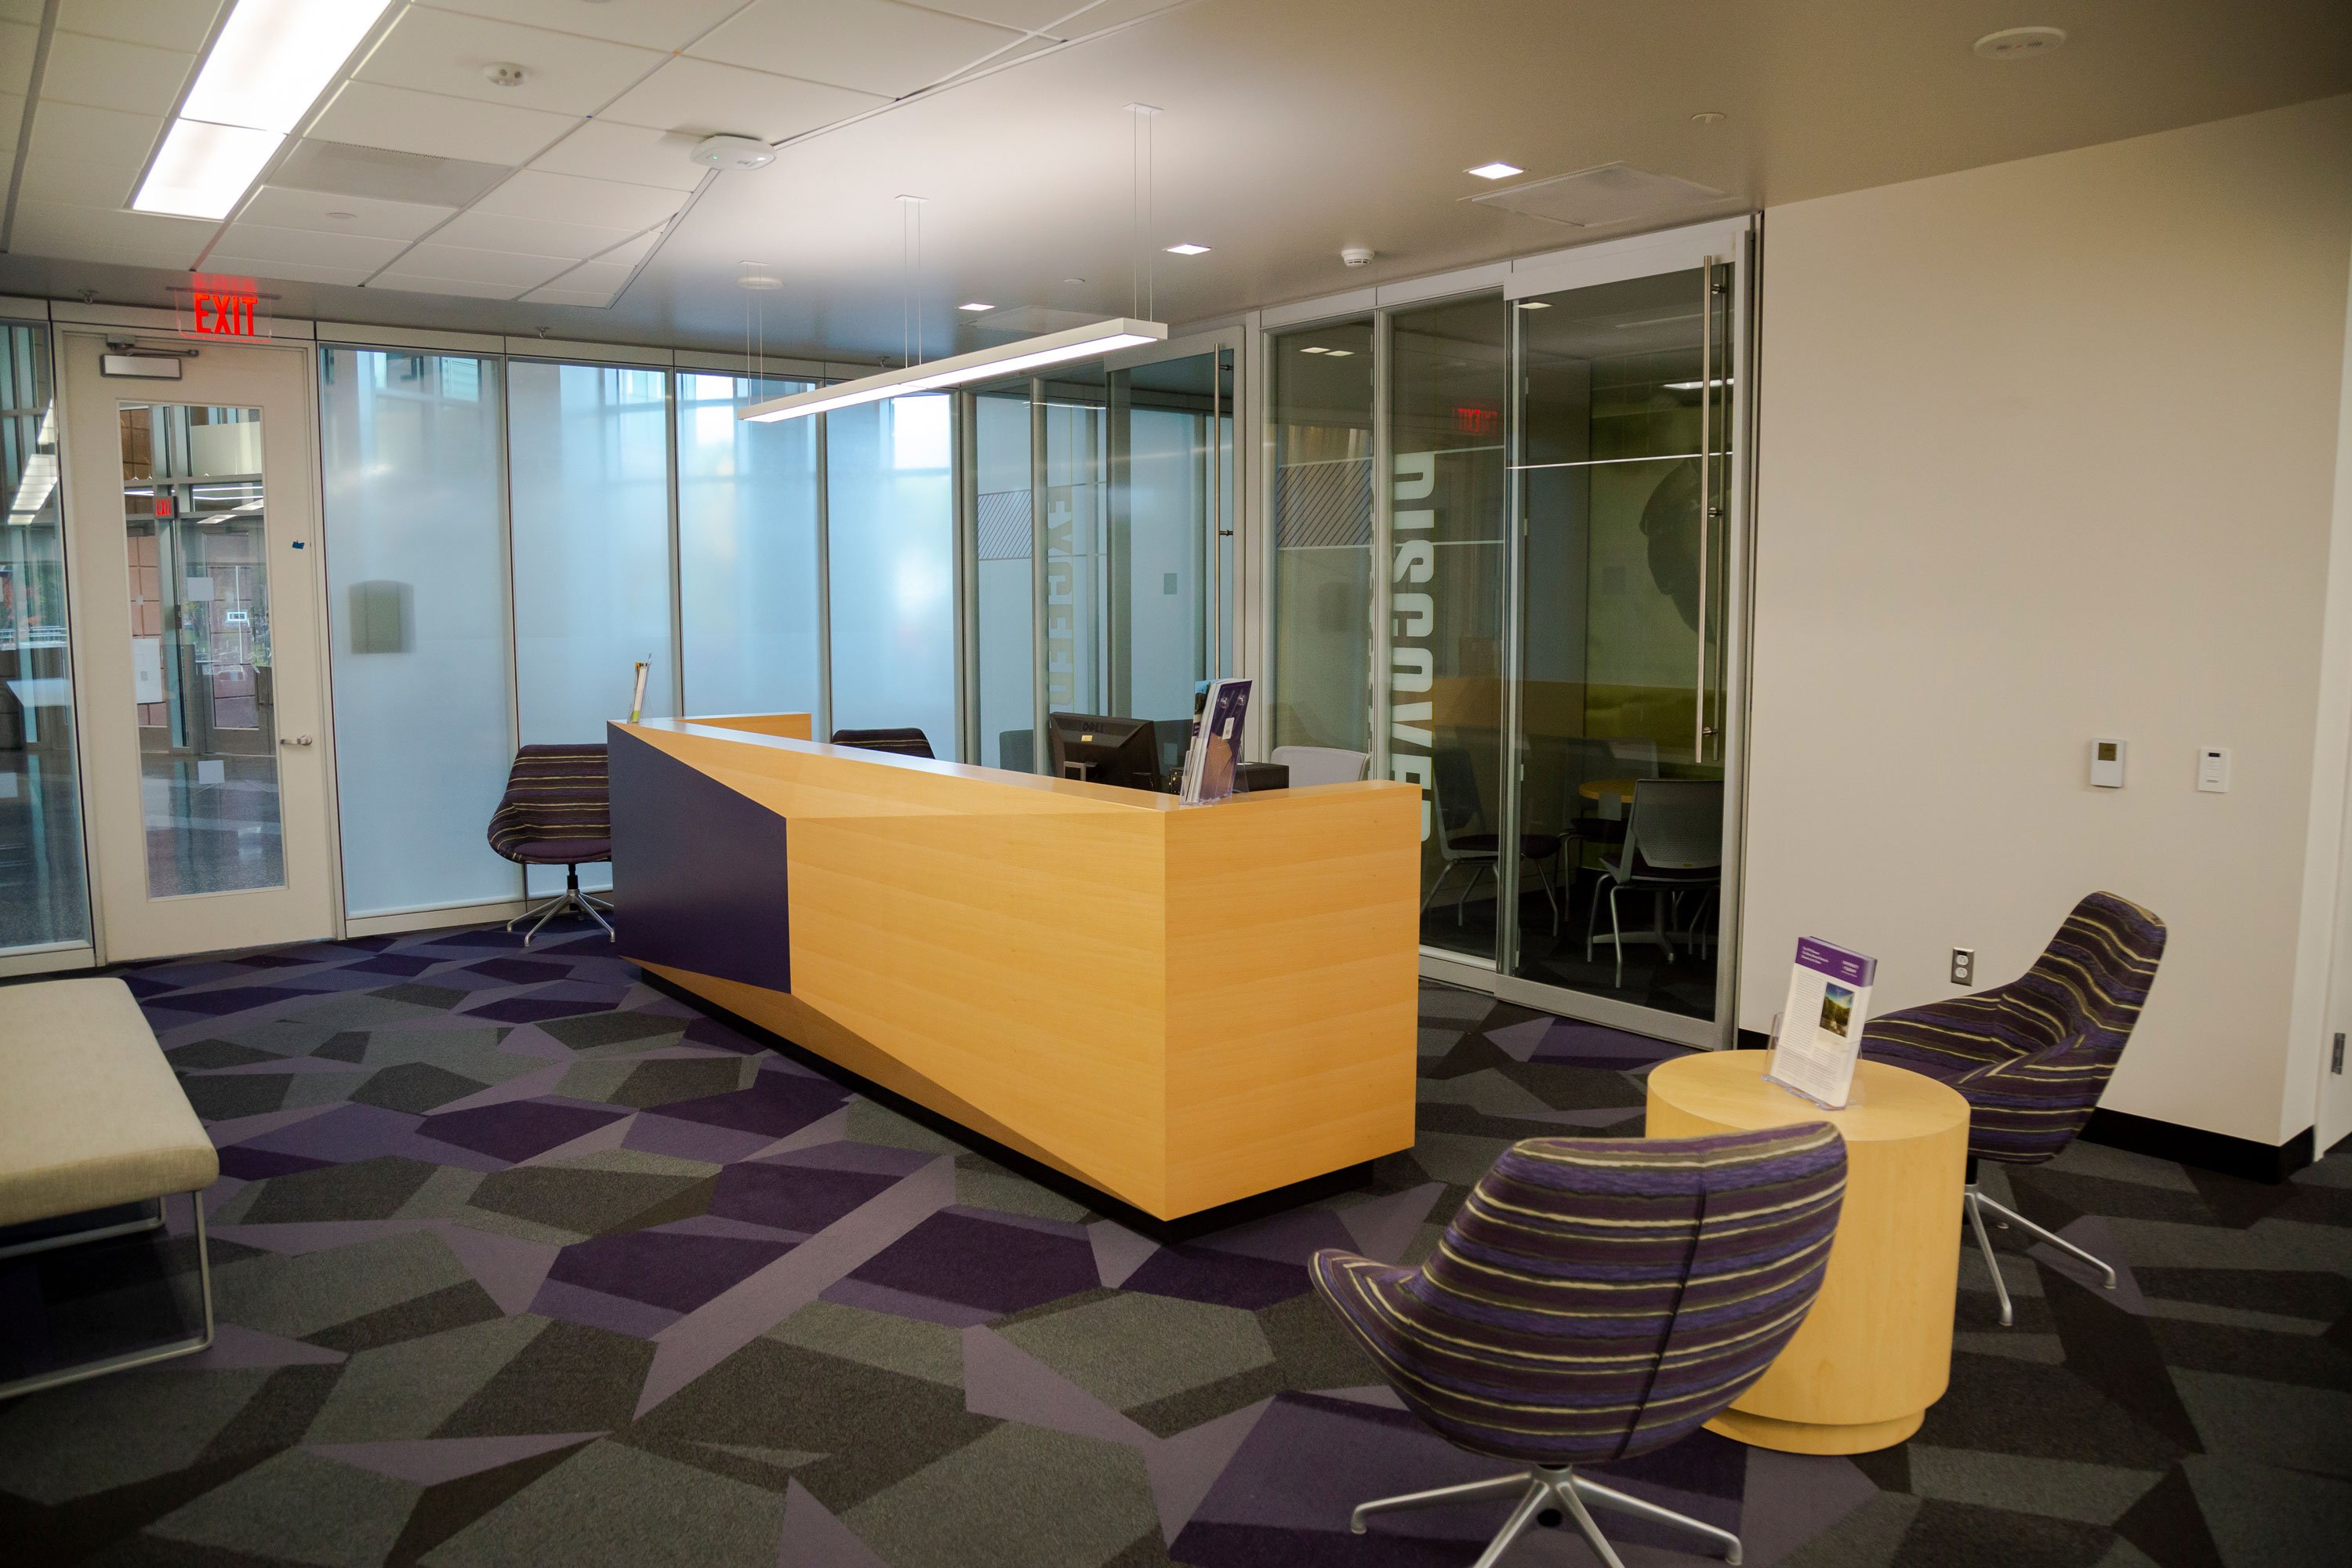 The entrance of the Innovation Center has a front desk, a bench, a few chairs and a low table with brochures.